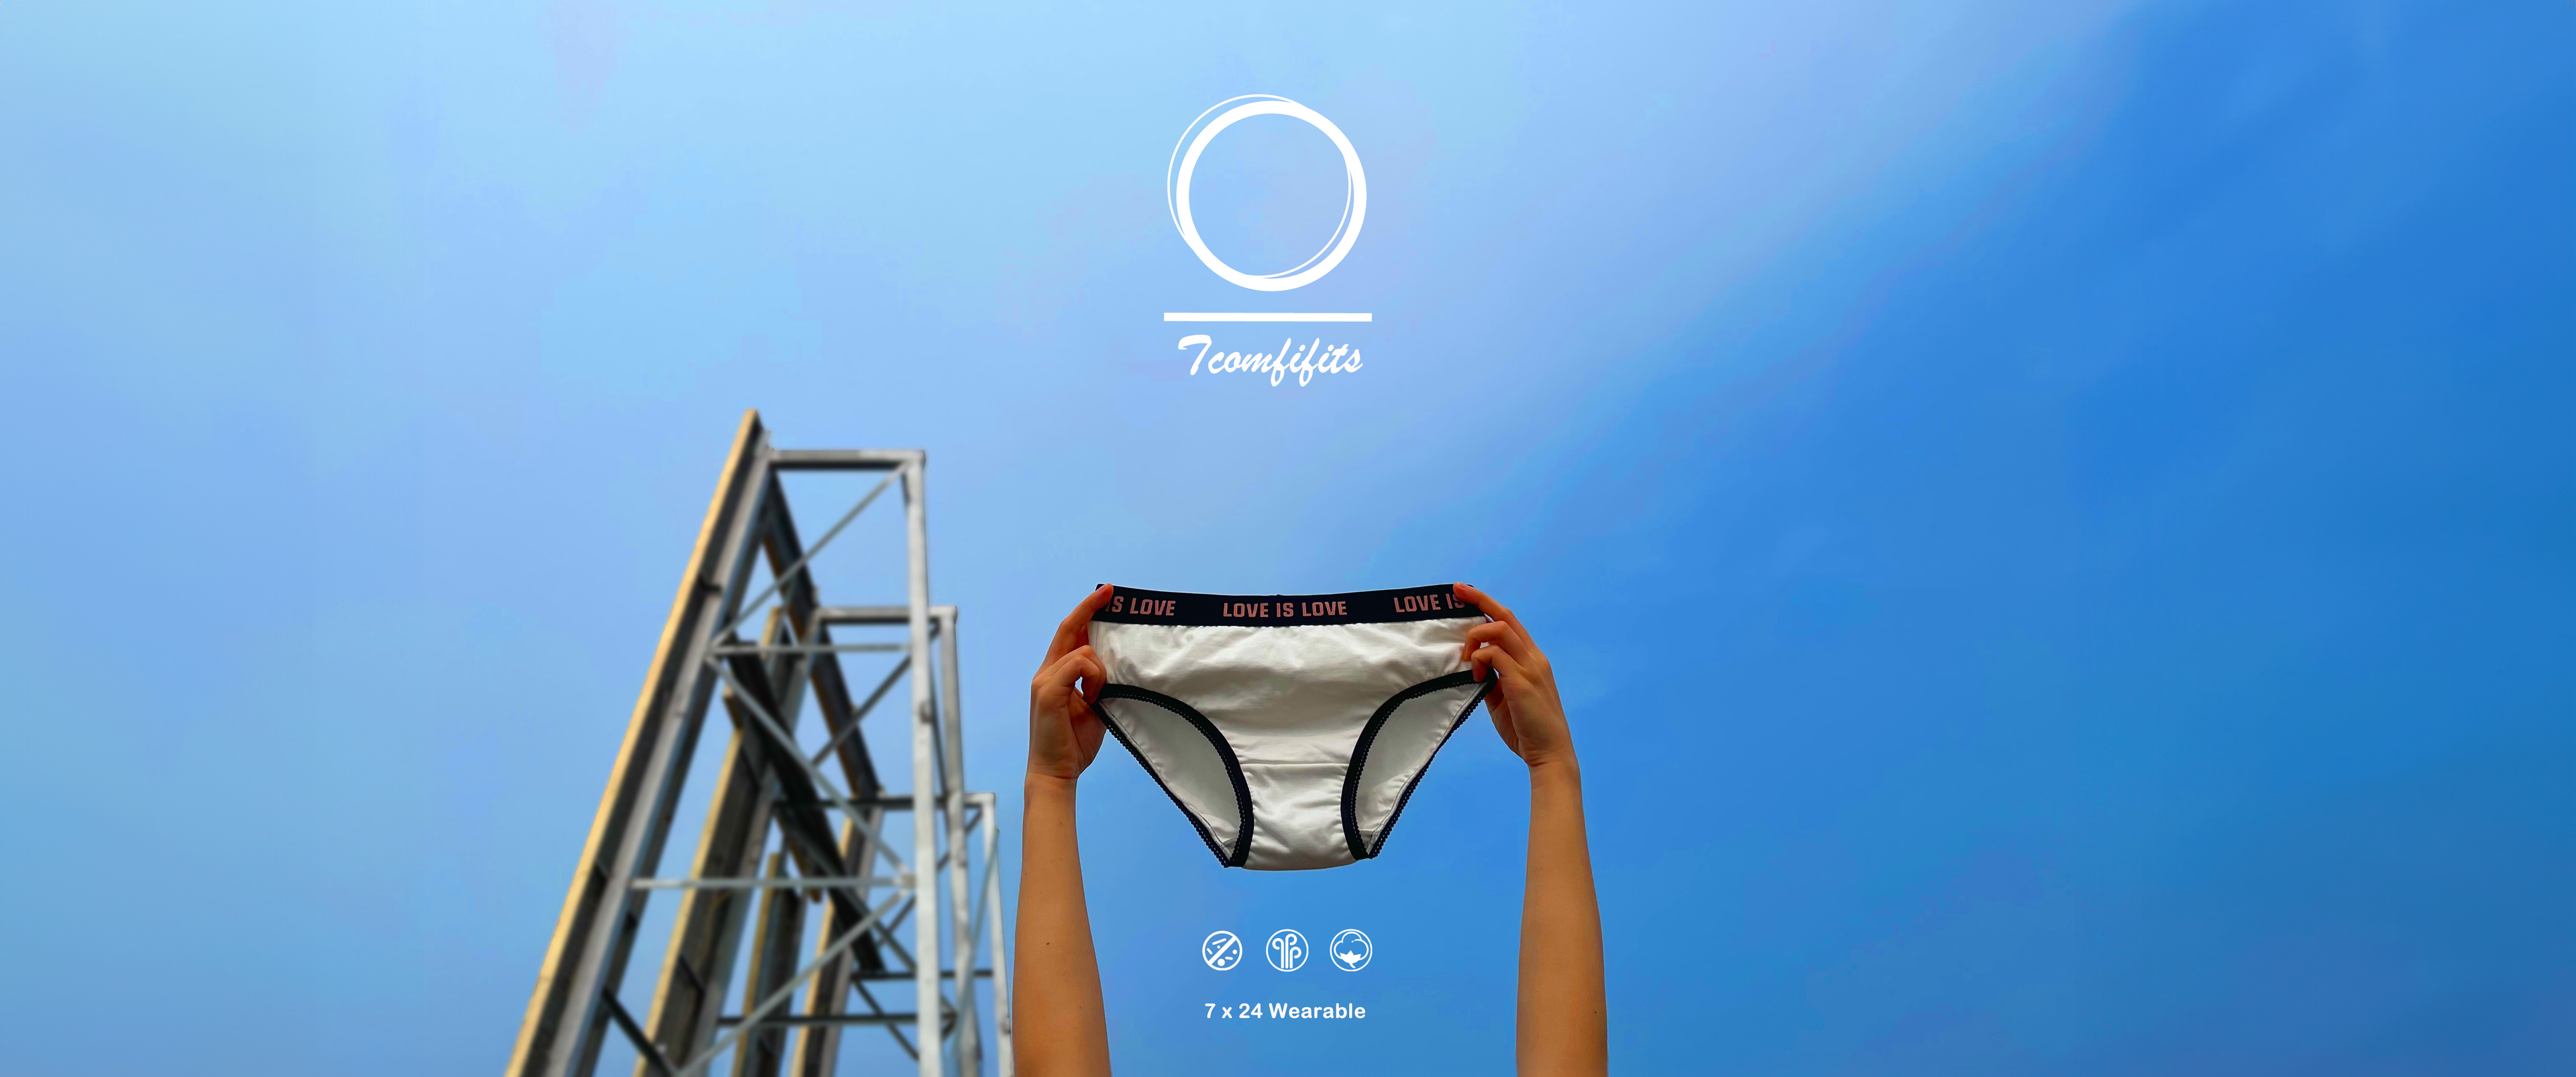 The world's most comfortable tucking underwear panties & gaff – tcomfifits